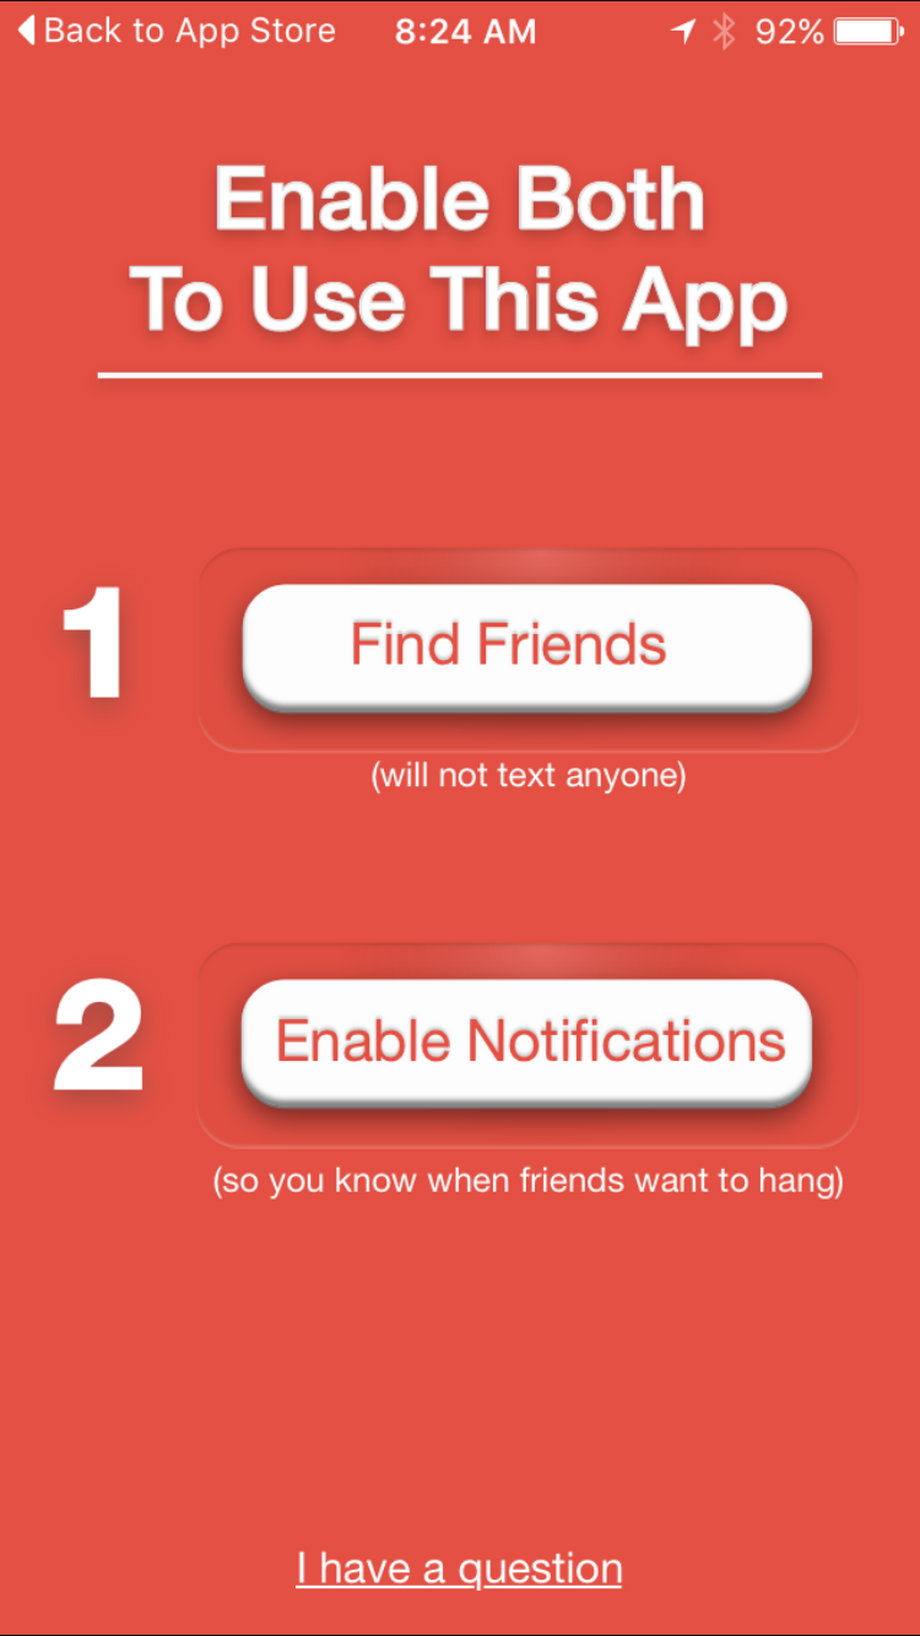 Then you enable notifications (so you know when people are "down").